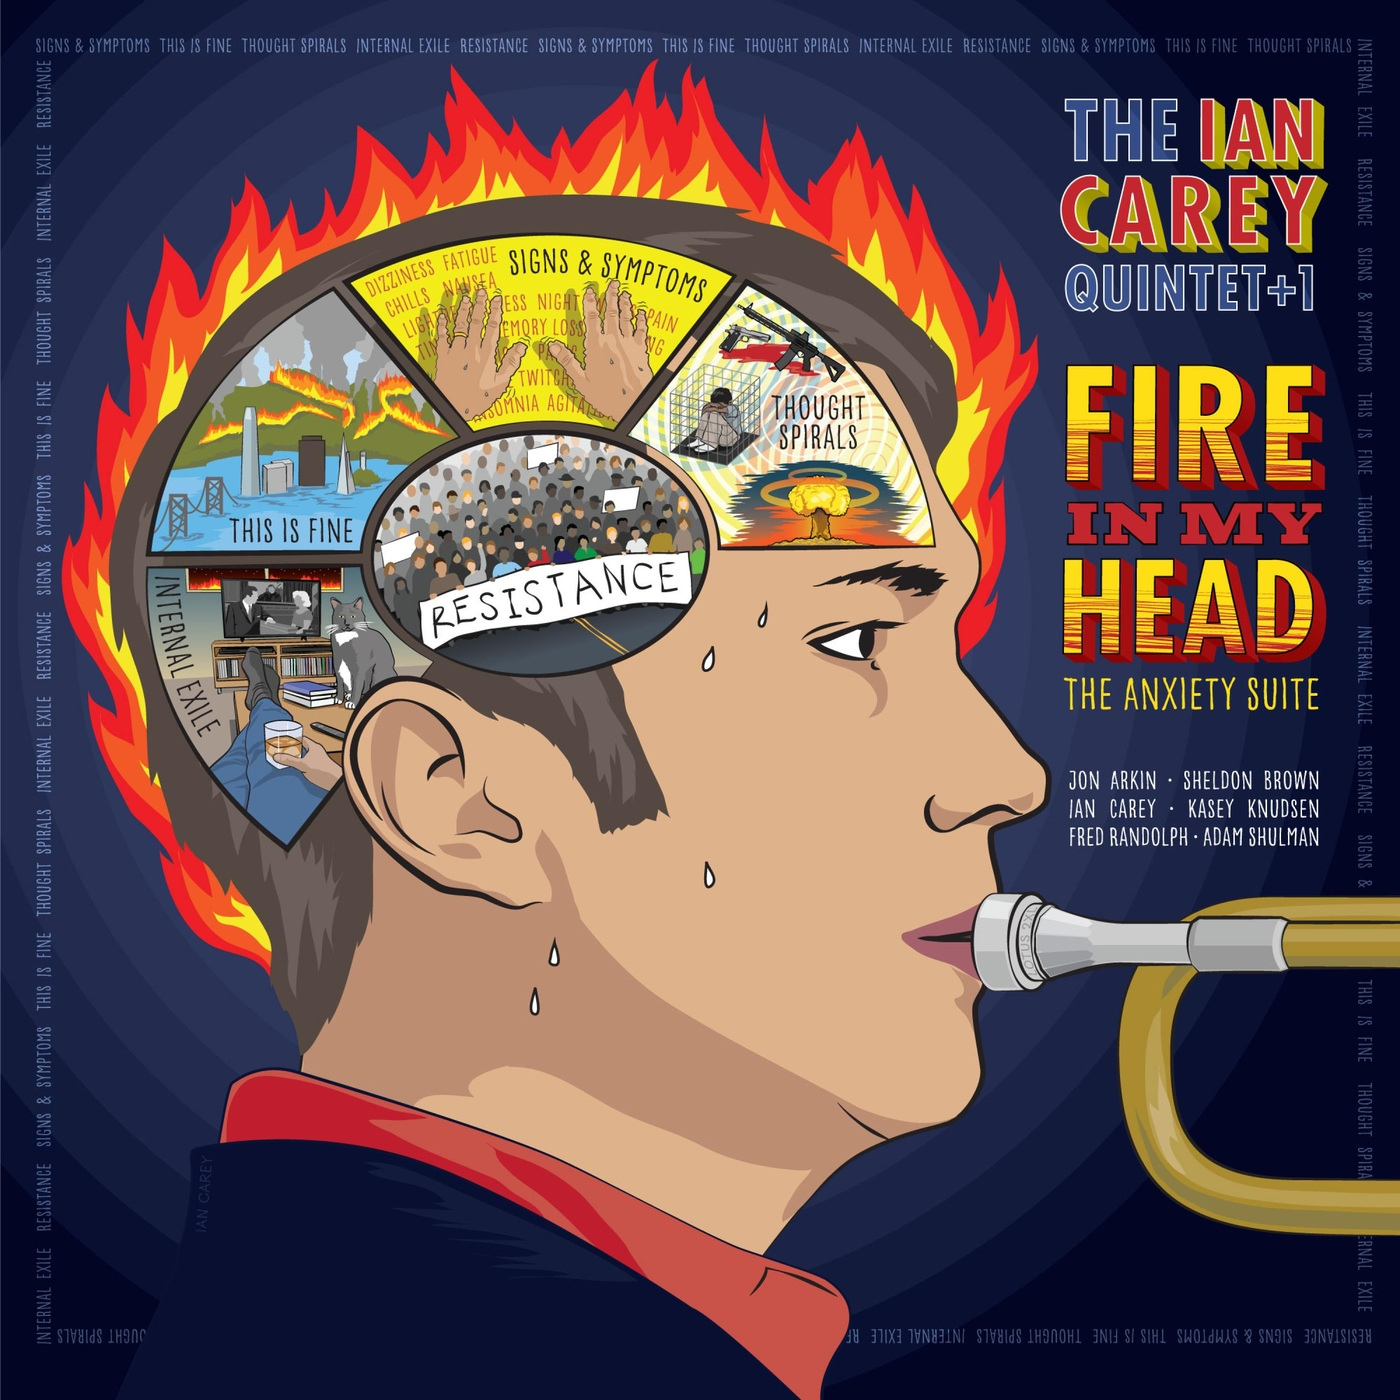 Ian Carey Quintet12020 Fire in My Head The Anxiety Suite